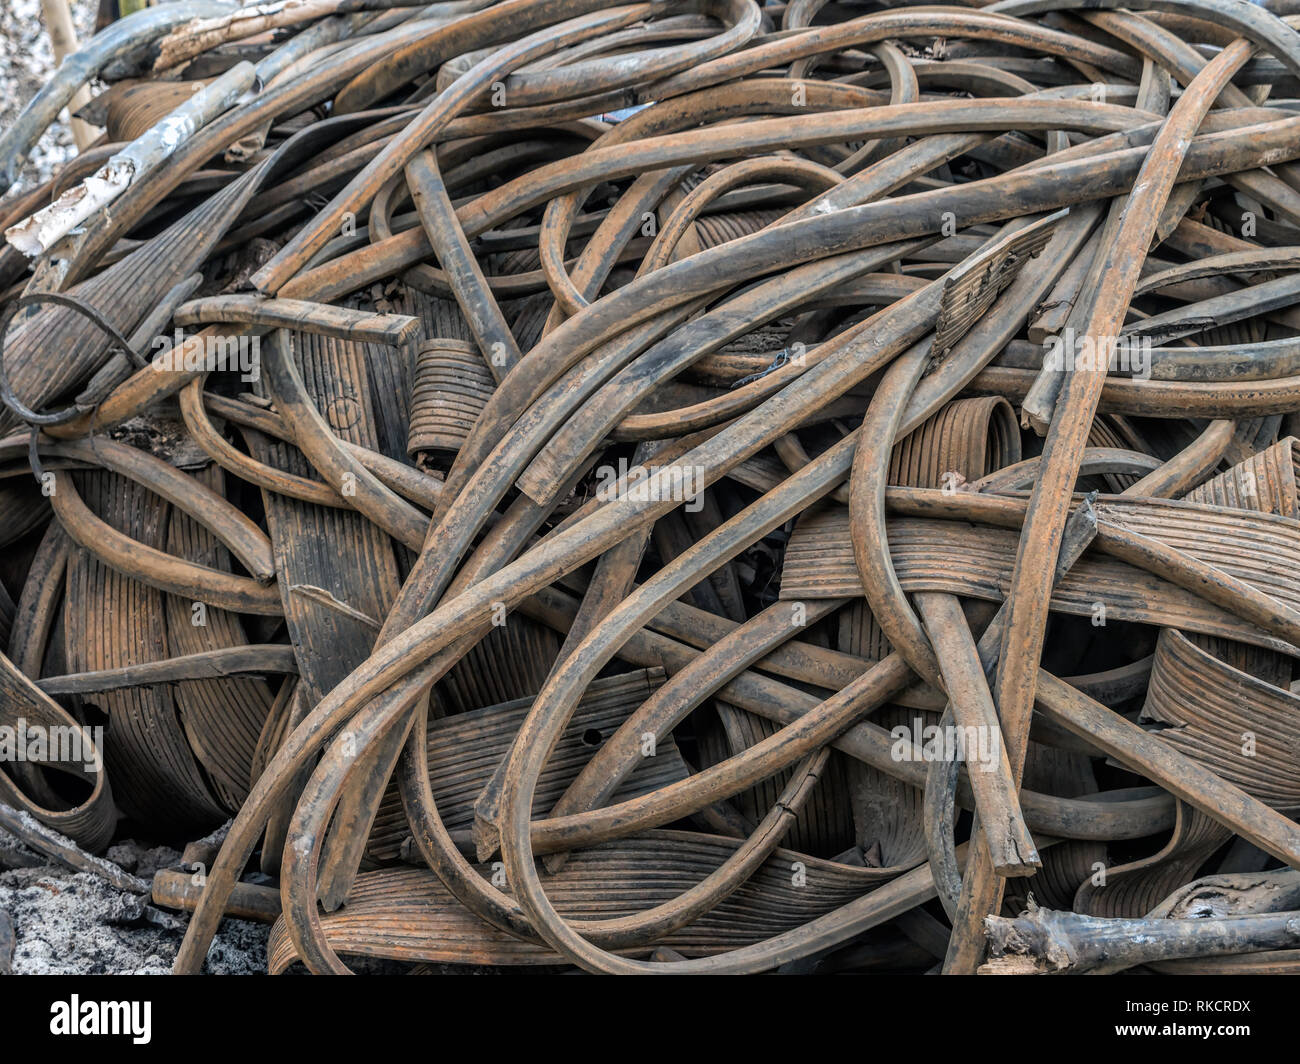 Pile of old and worn out tramway vibroinsulation Stock Photo